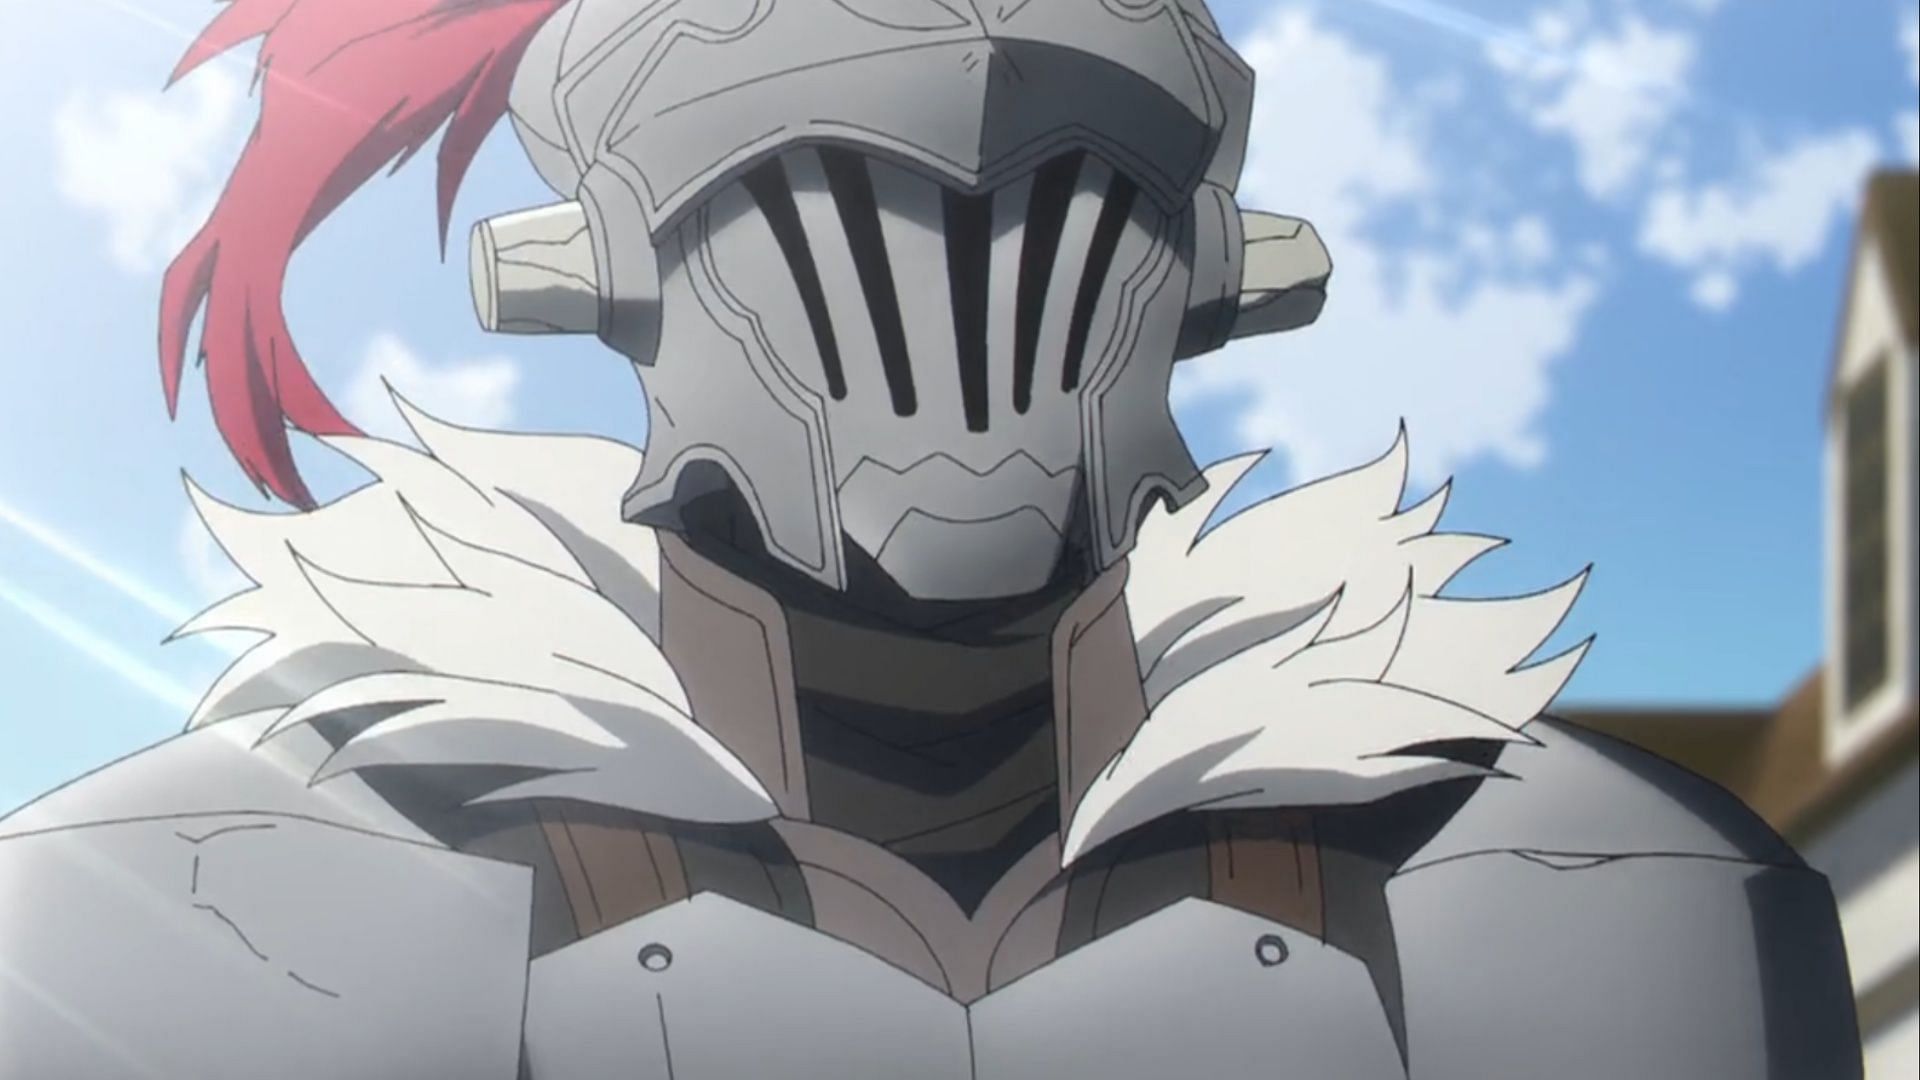 Goblin Slayer season 2 leaves fans reeling in surprise with the